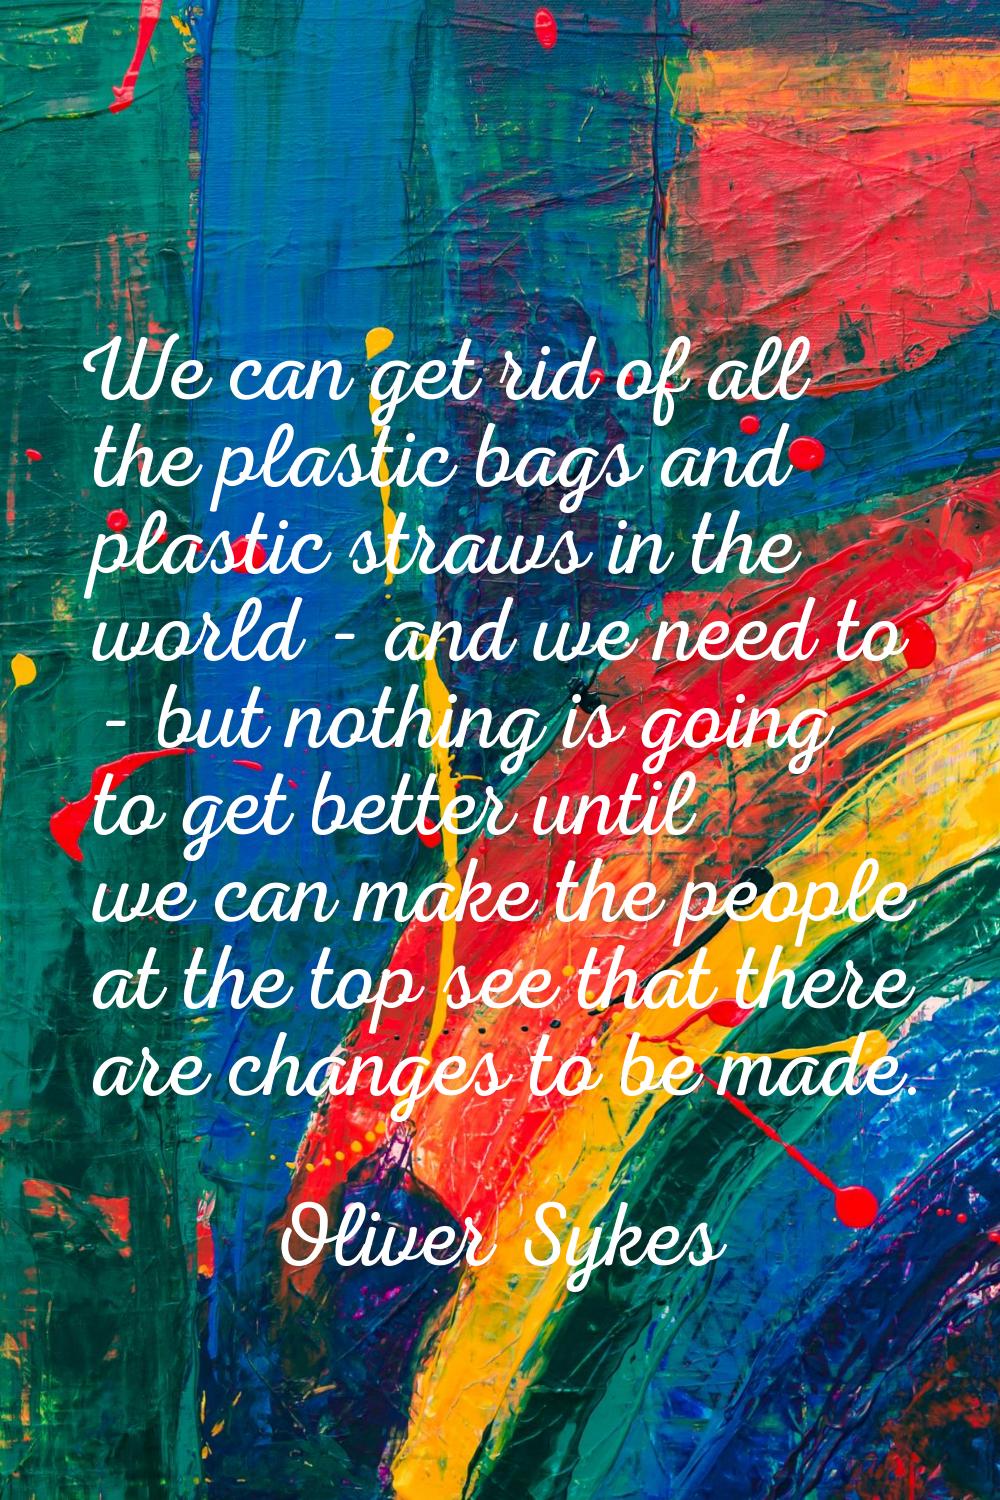 We can get rid of all the plastic bags and plastic straws in the world - and we need to - but nothi